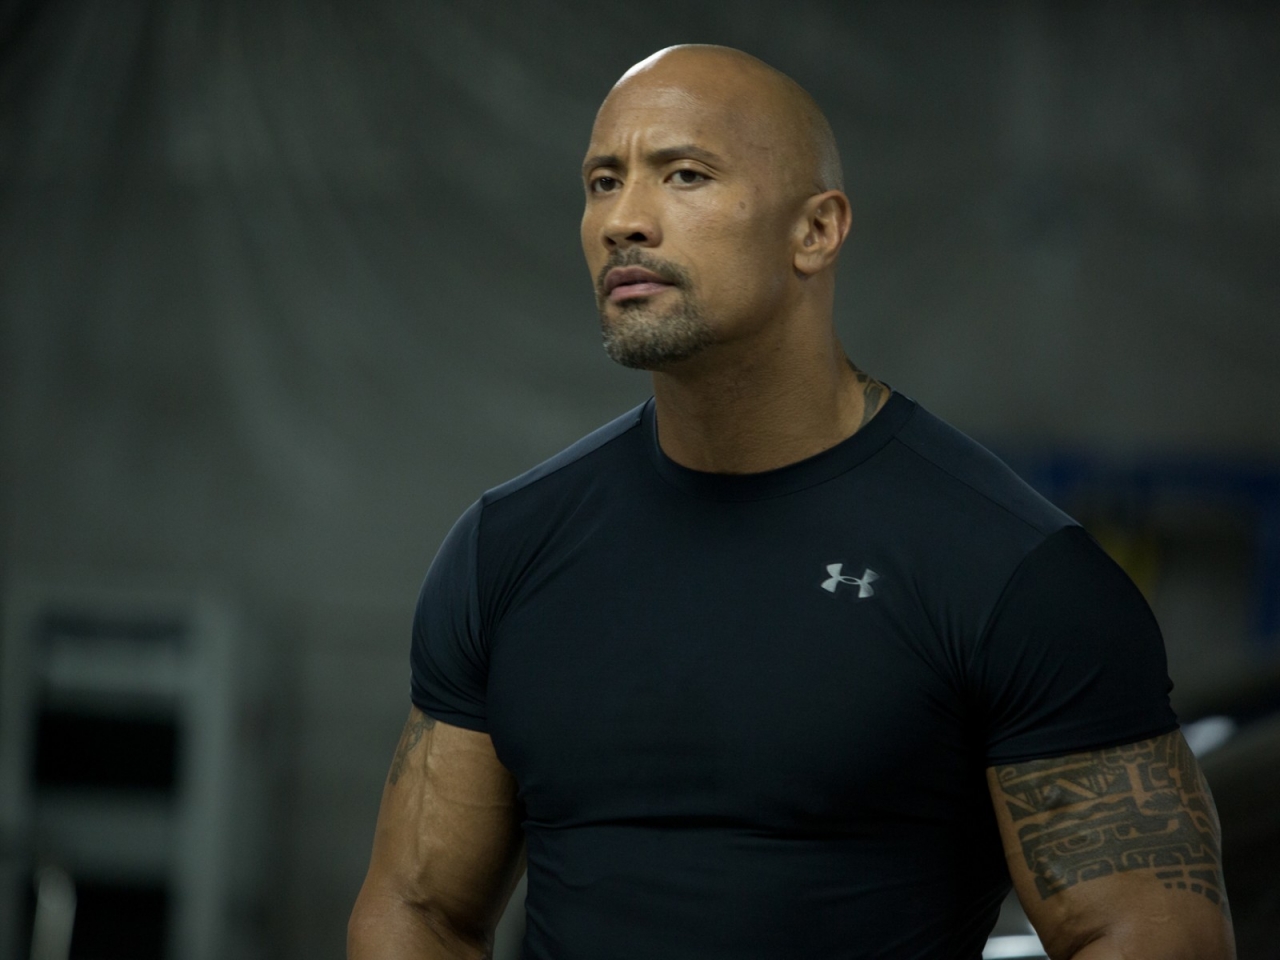 Dwayne Johnson Fast and Furious 6 for 1280 x 960 resolution